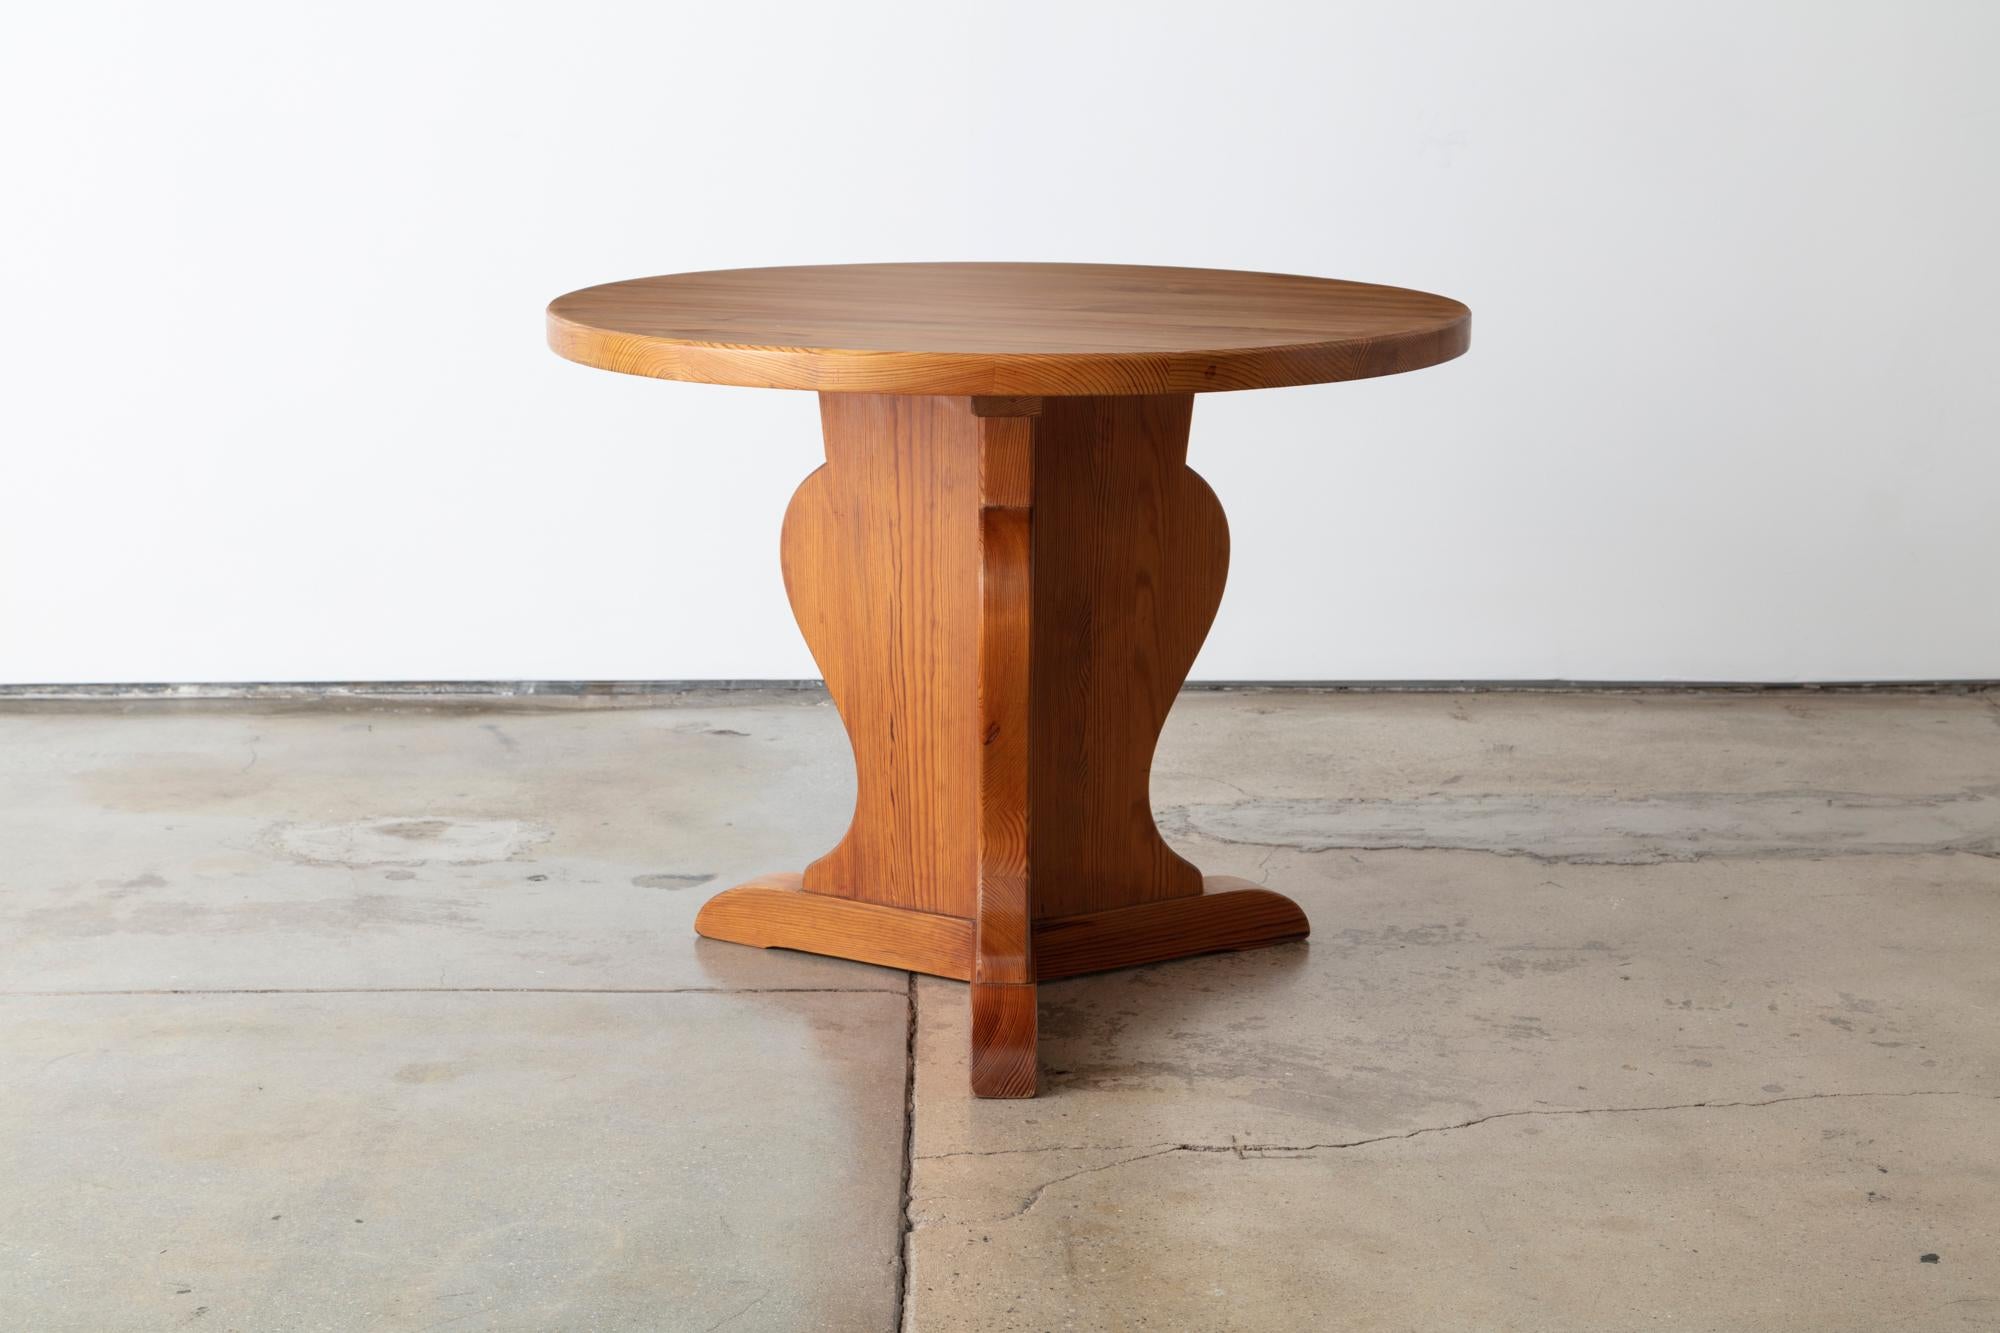 Pine occasional table for Nordiska Kompaniet designed by Axel Einar Hjorth, circa 1930

Measures: 24